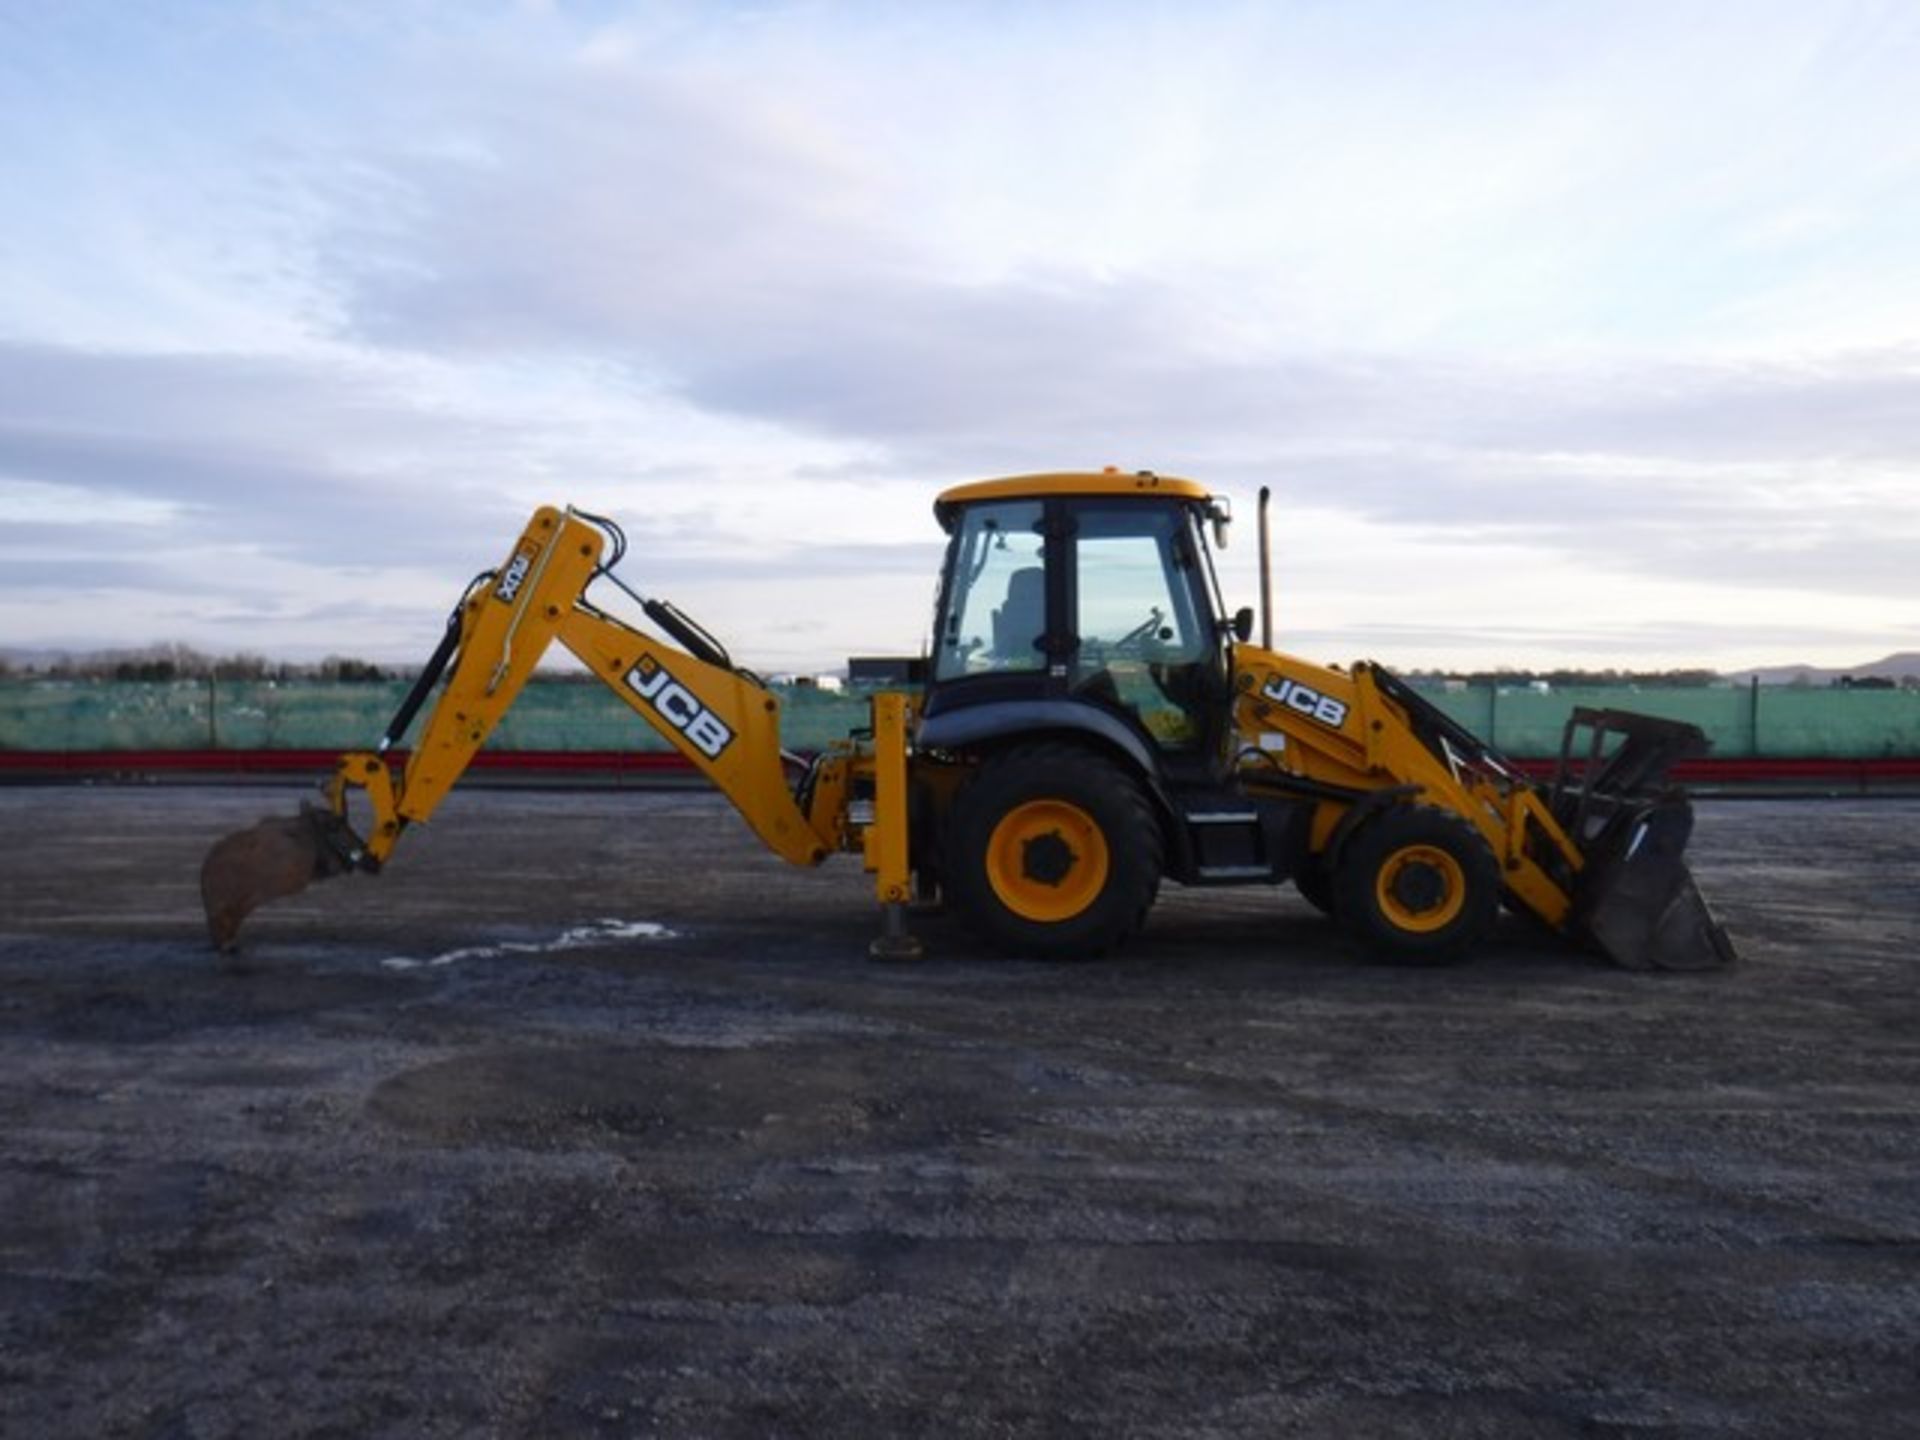 2011 JCB 3CX ECO 4 in 1 bucket S/N JCB3CX4TP02008318 - 6175 hrs (not verified) - Image 3 of 14